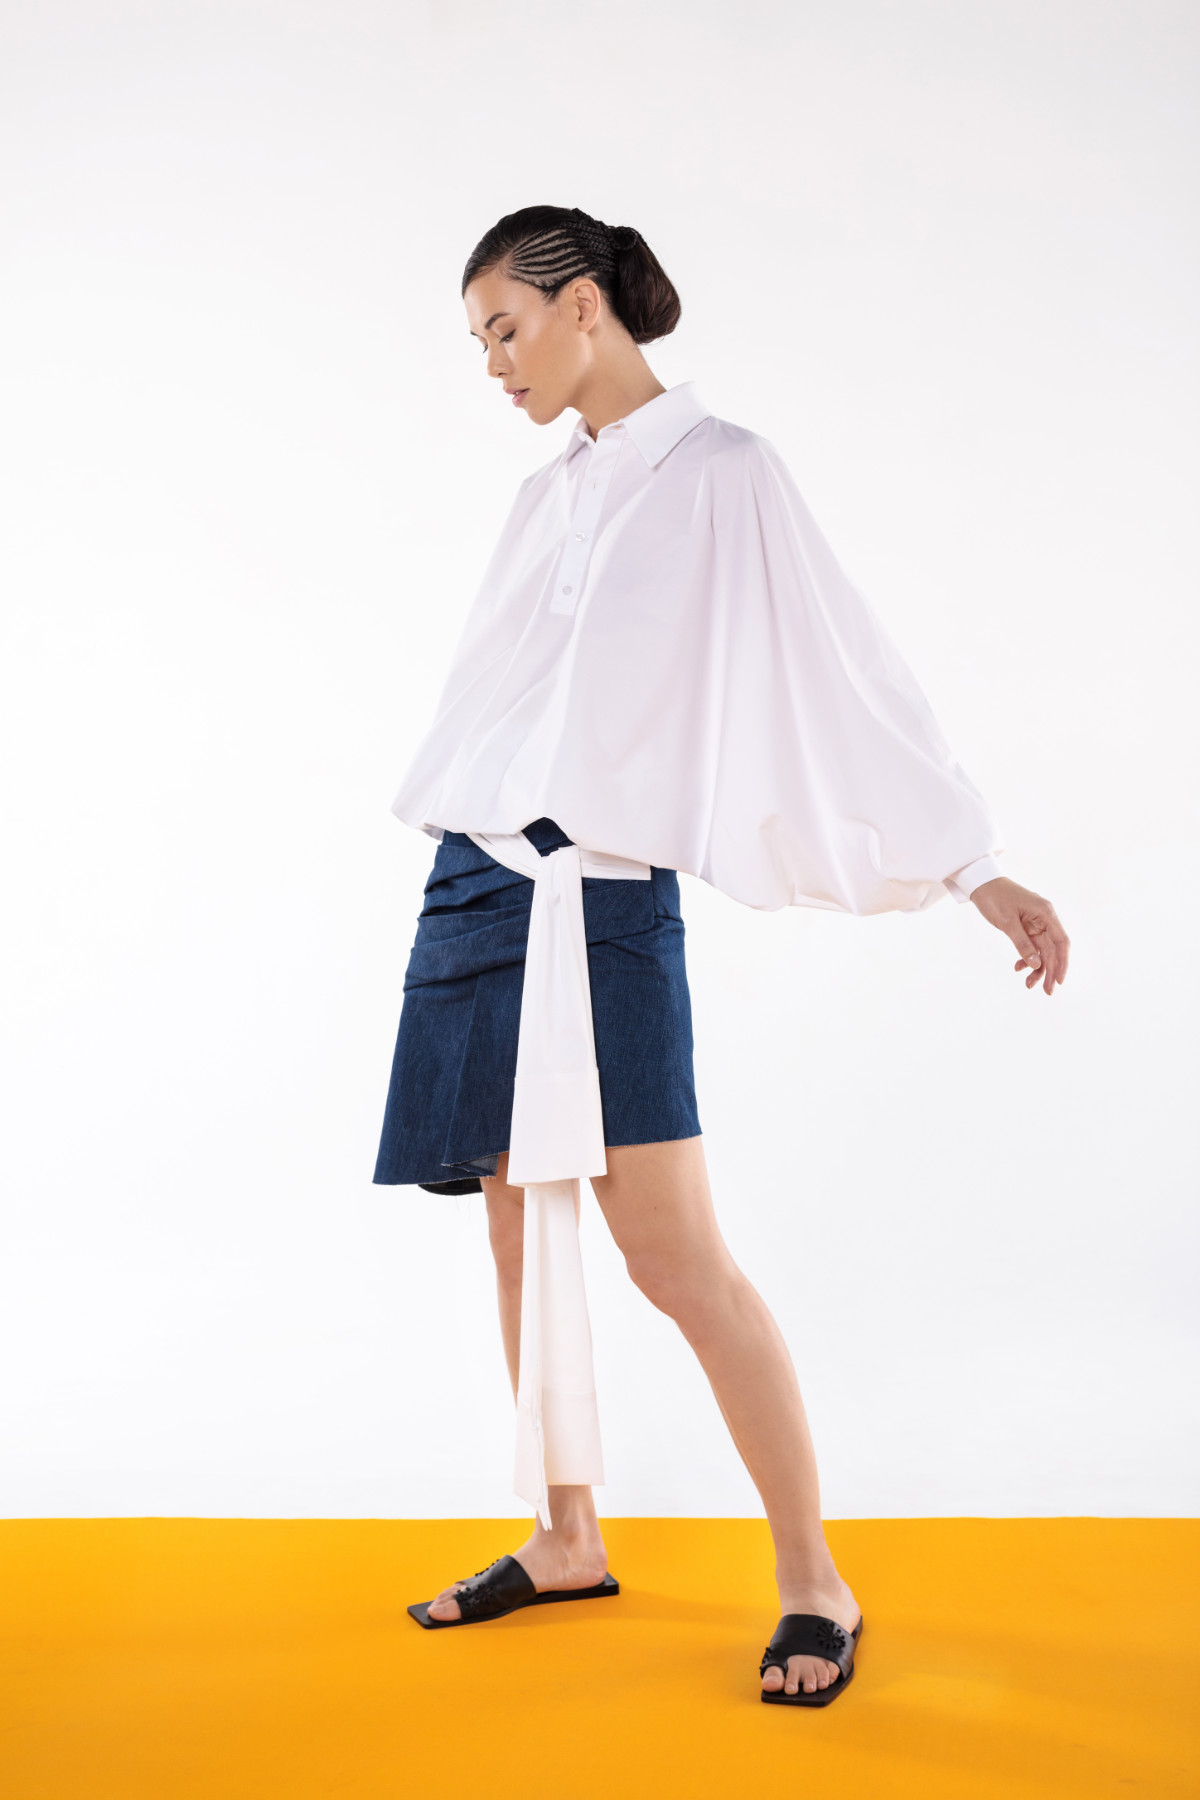 Mossi Presents Its Spring Summer 2022 Collection